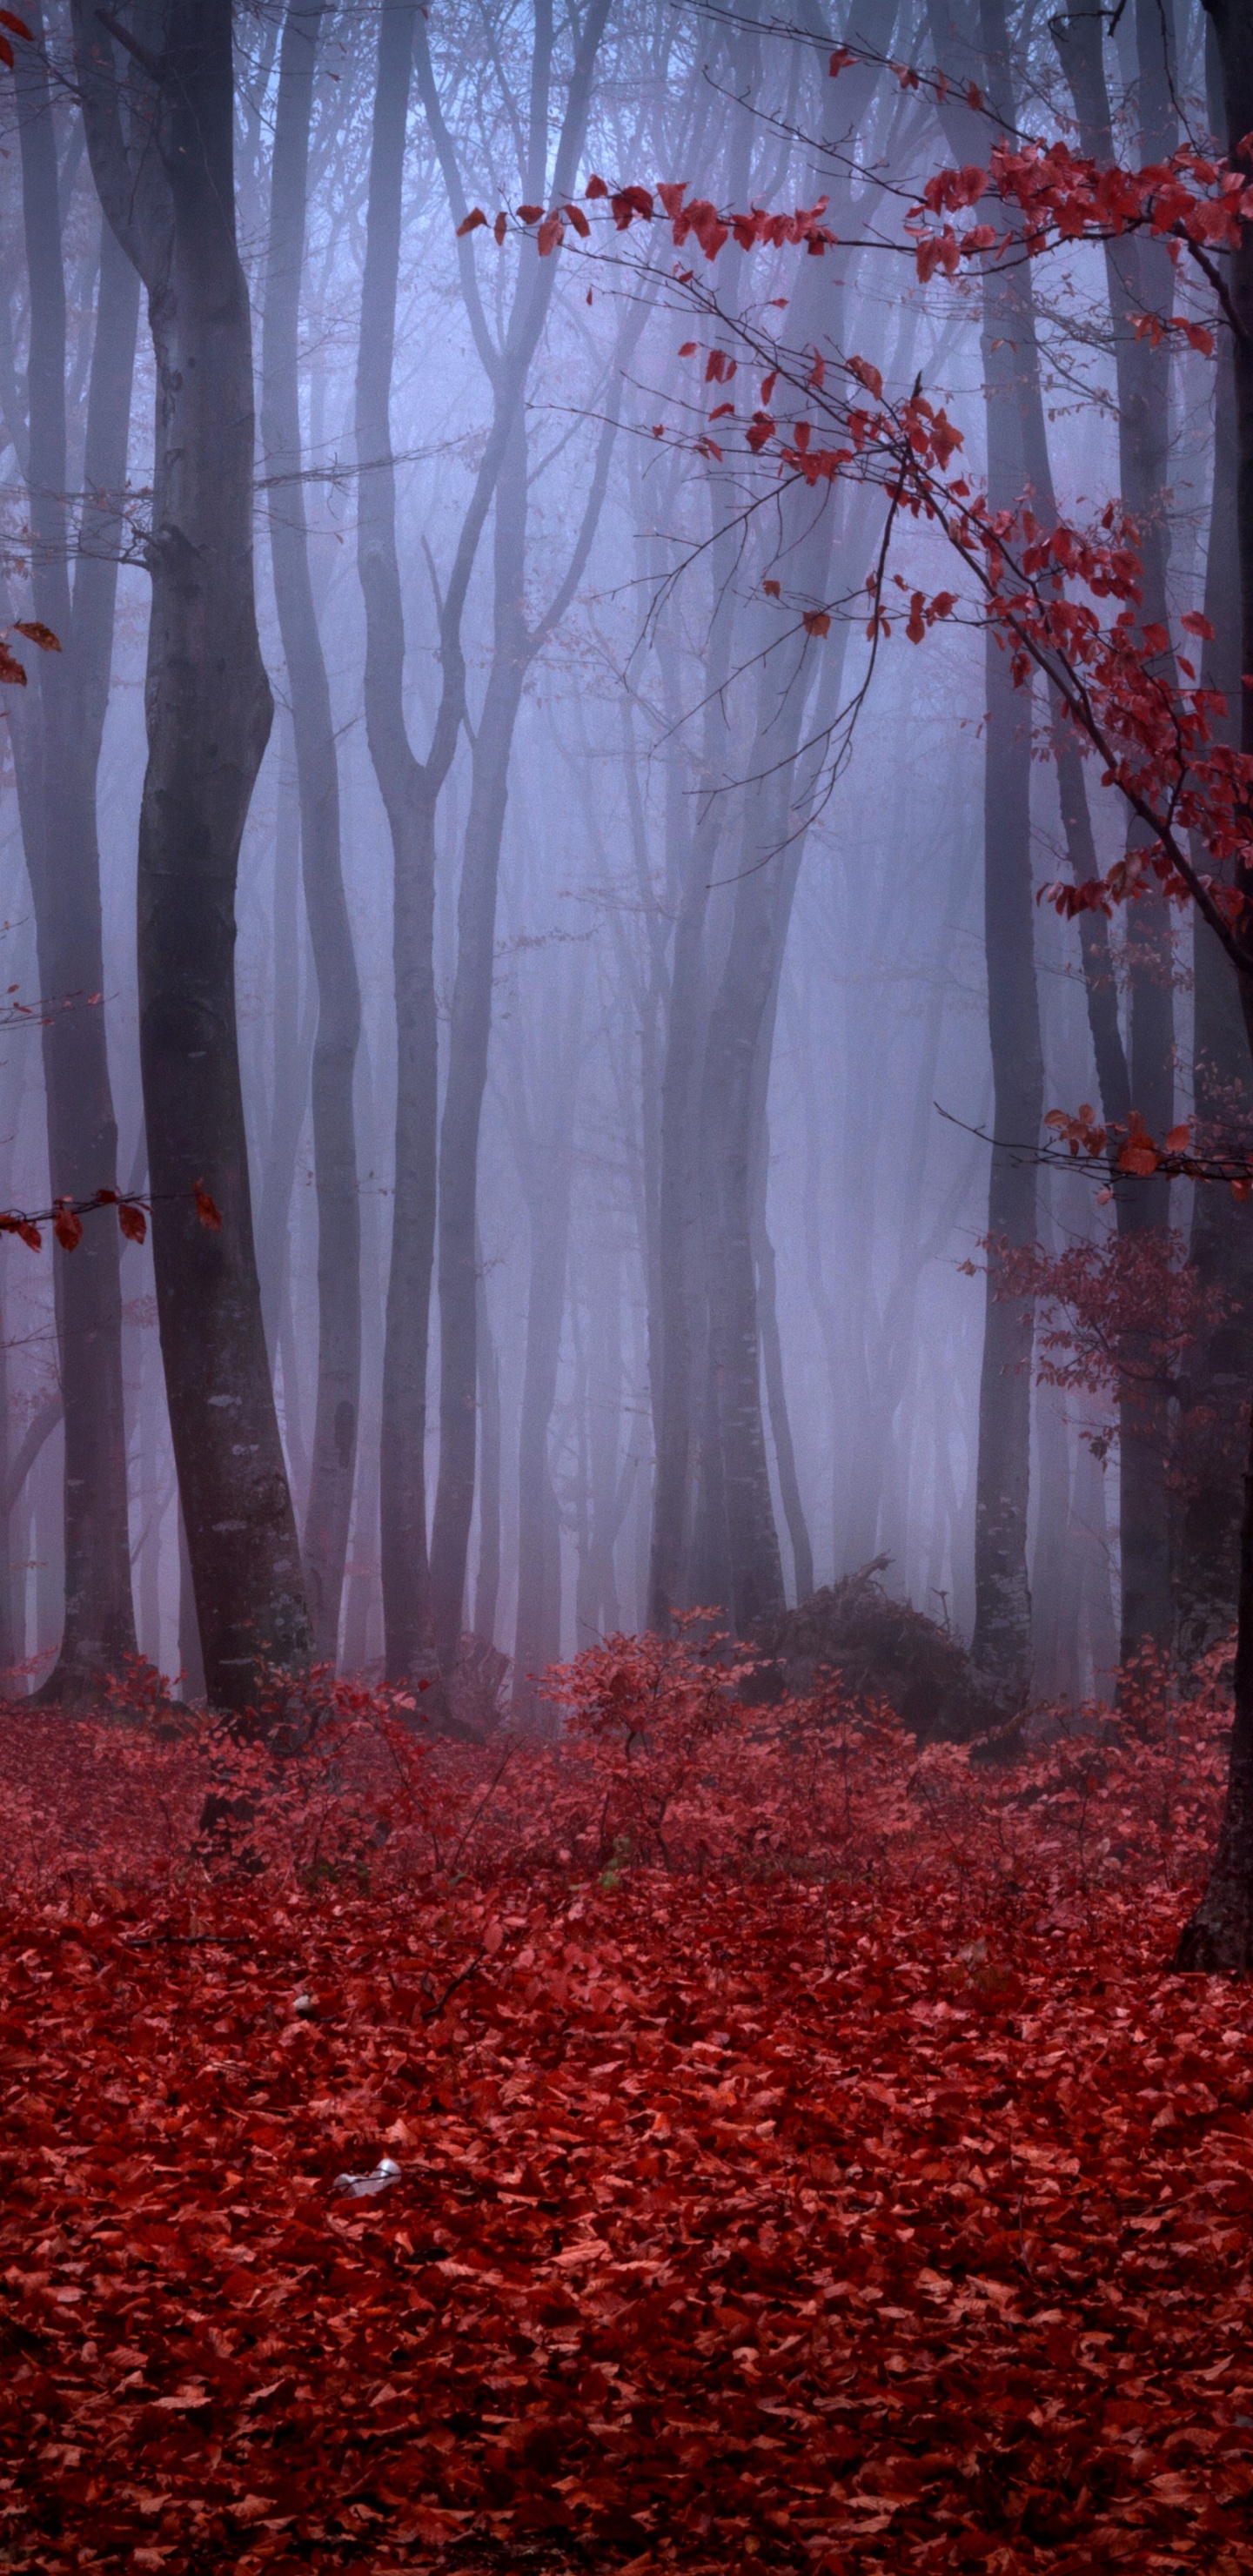 Mystical Foggy Forest In Autumn